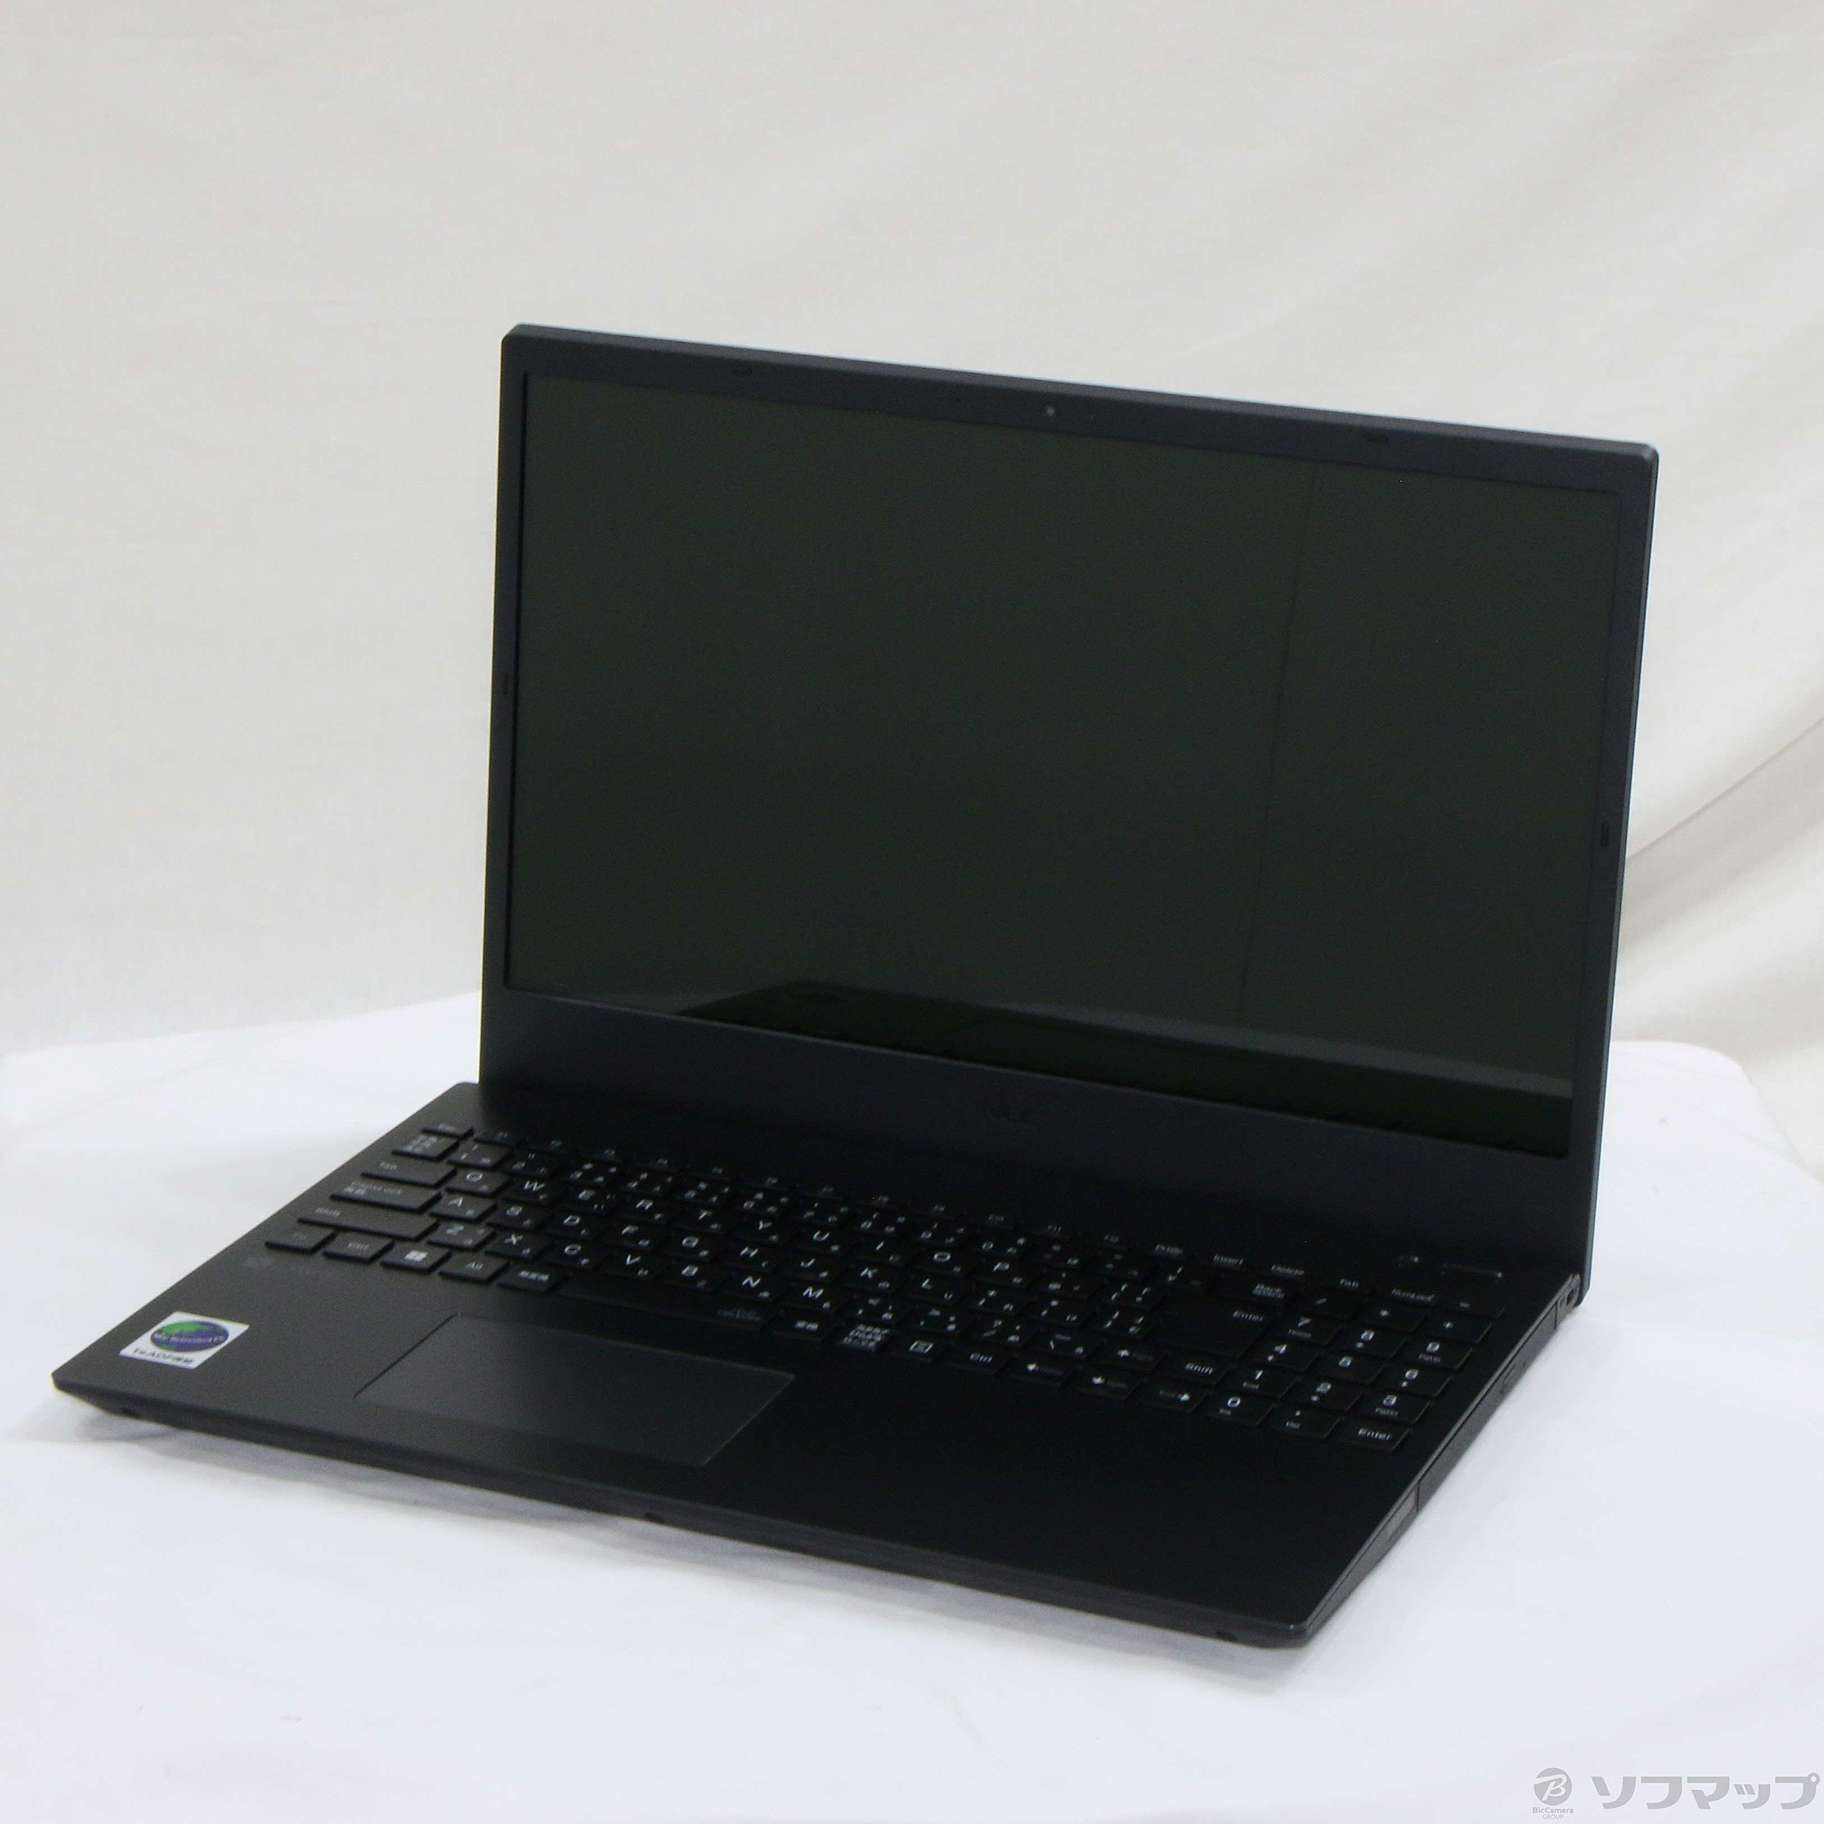 LAVIE Direct N15 PC-GN12NBEAS パールブラック 〔NEC Refreshed PC〕 ≪メーカー保証あり≫